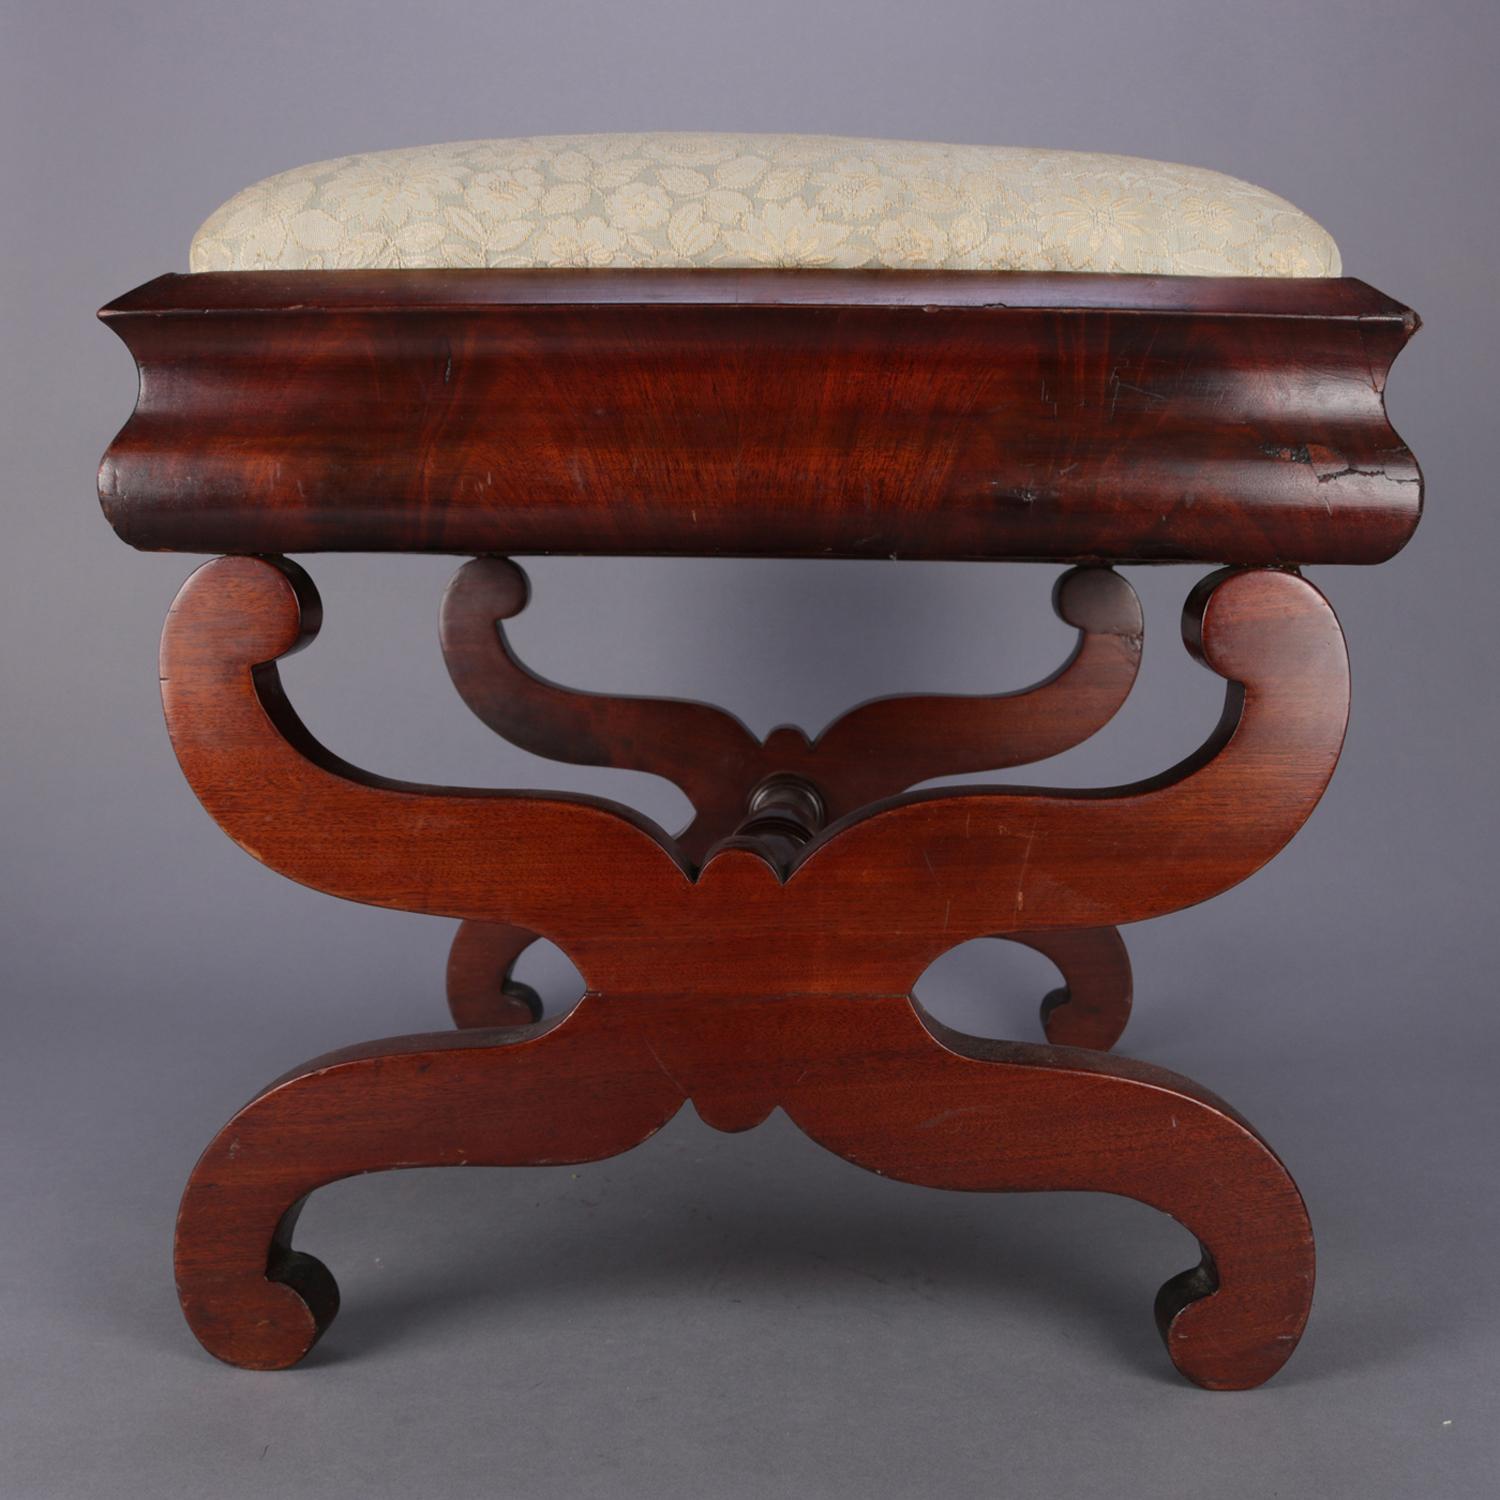 cushioned footstool associated with empire